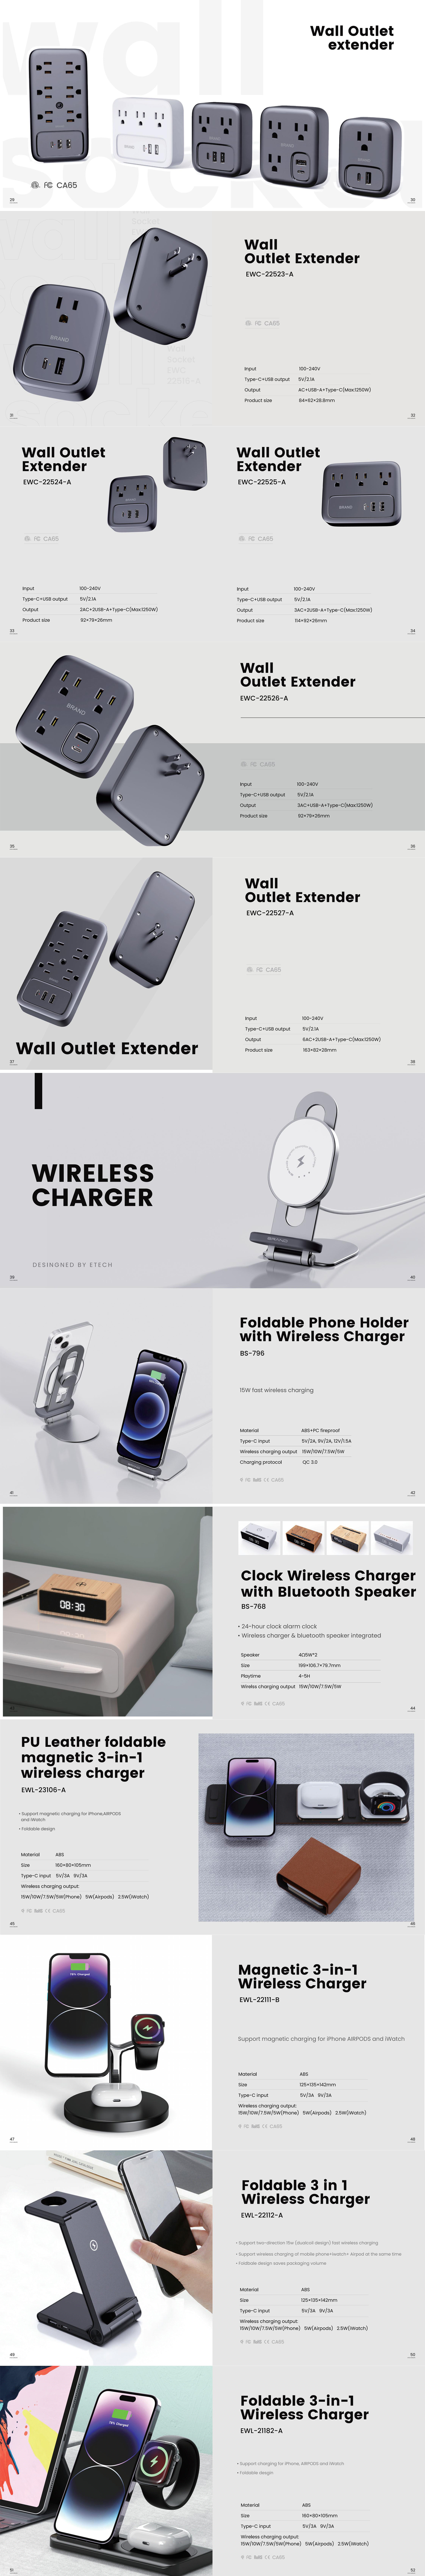 Etech. Wall outlet extender. Magnetic wireless charger